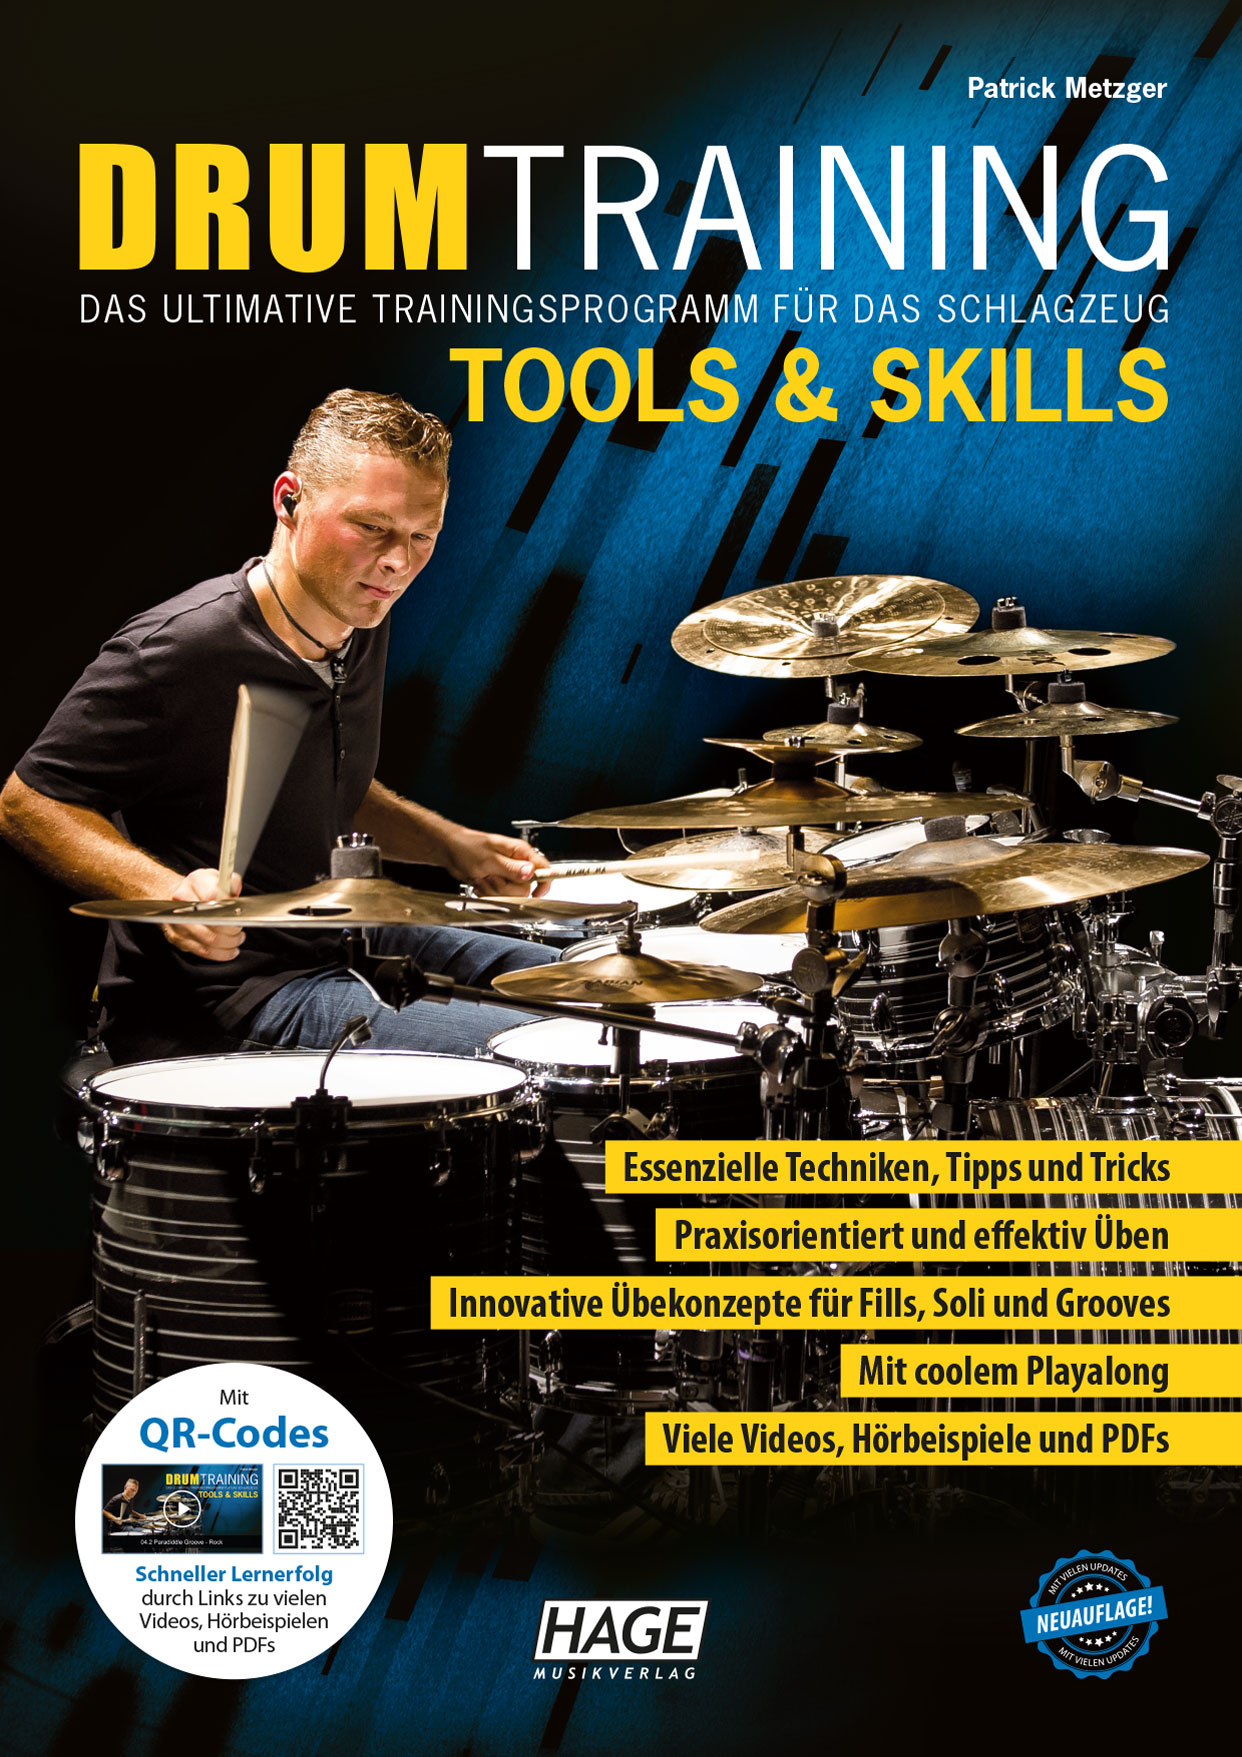 Drum Training Tools & Skills (with QR-Codes) Pages 1